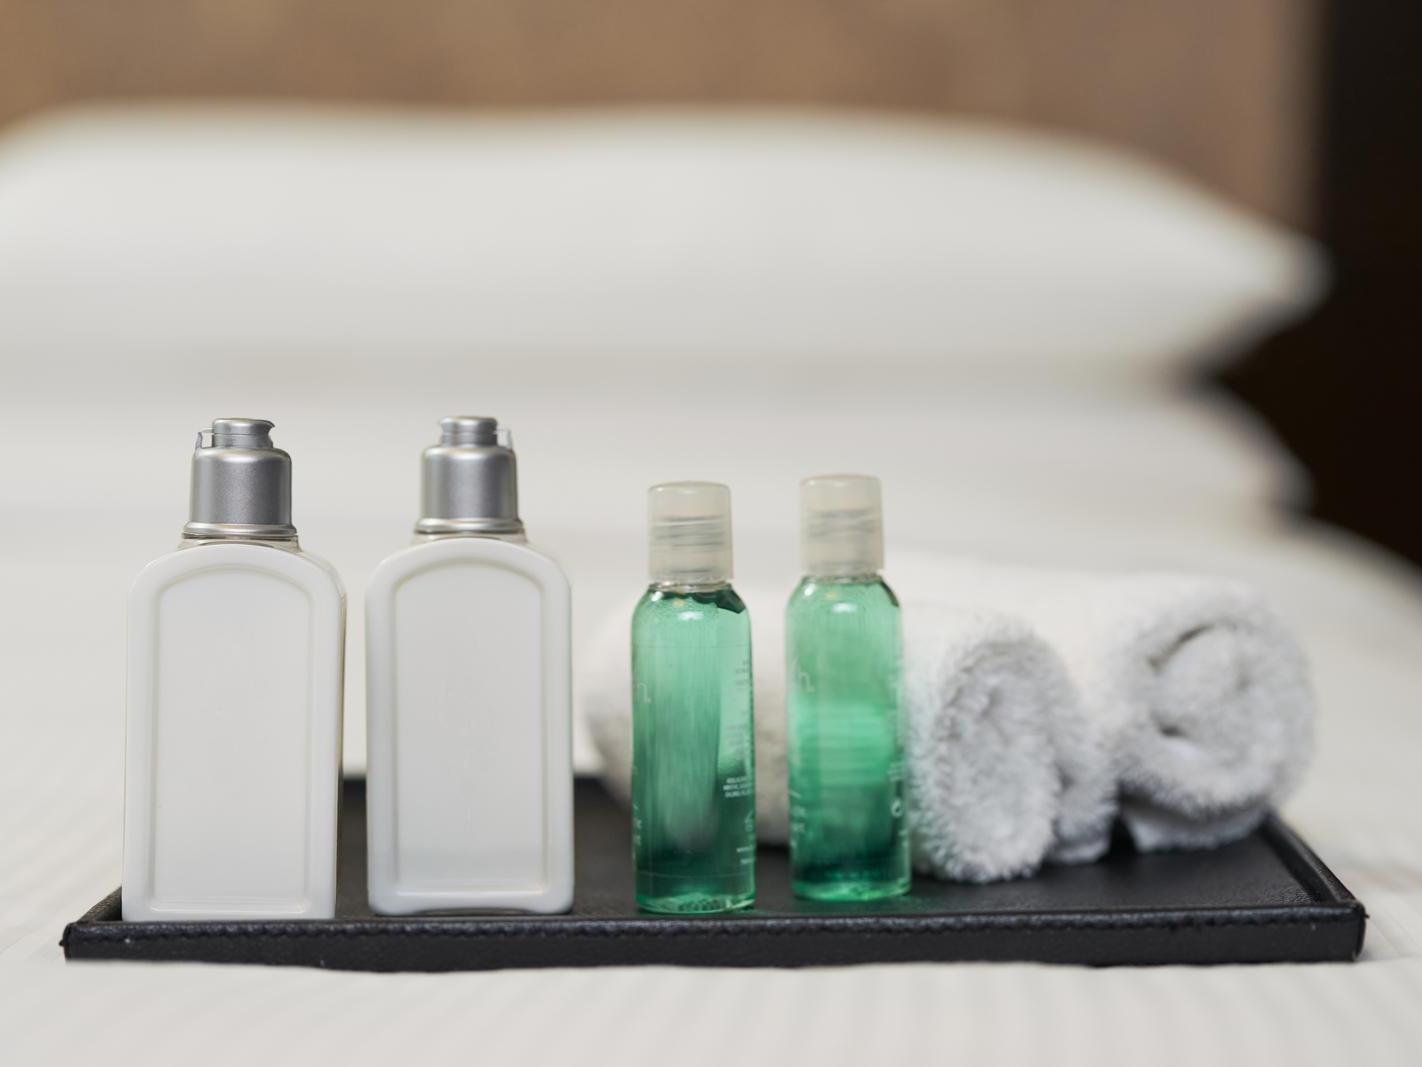  A tray with shampoo, conditioner, and soap bottles neatly arranged.